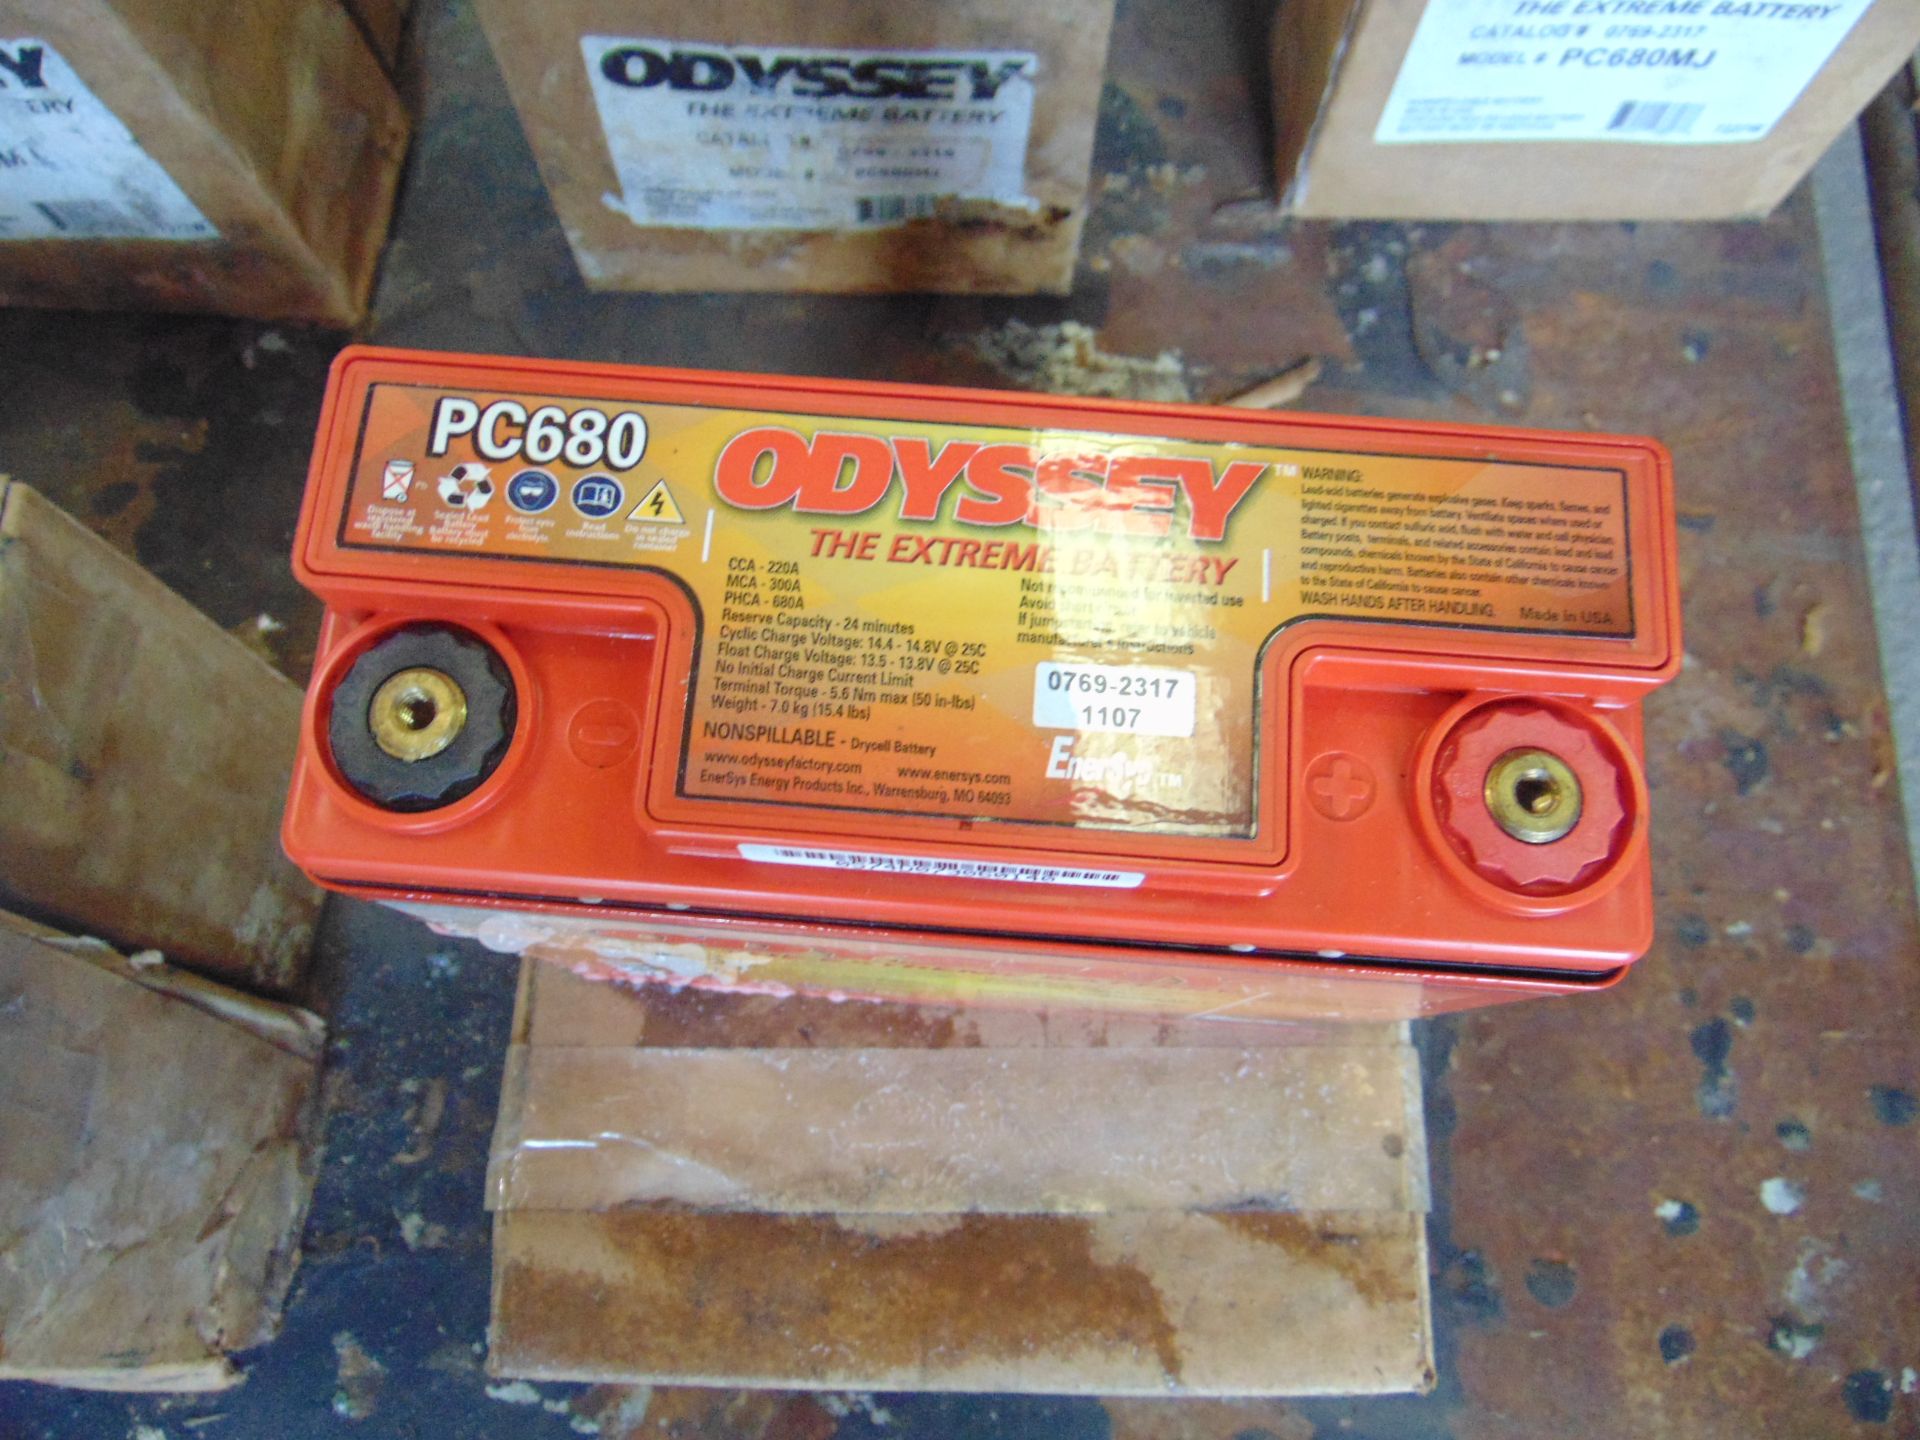 3 x ODYSSEY Extreme Pc680 MJ non spillable 12 Volt Batteries Unissued - Image 3 of 4